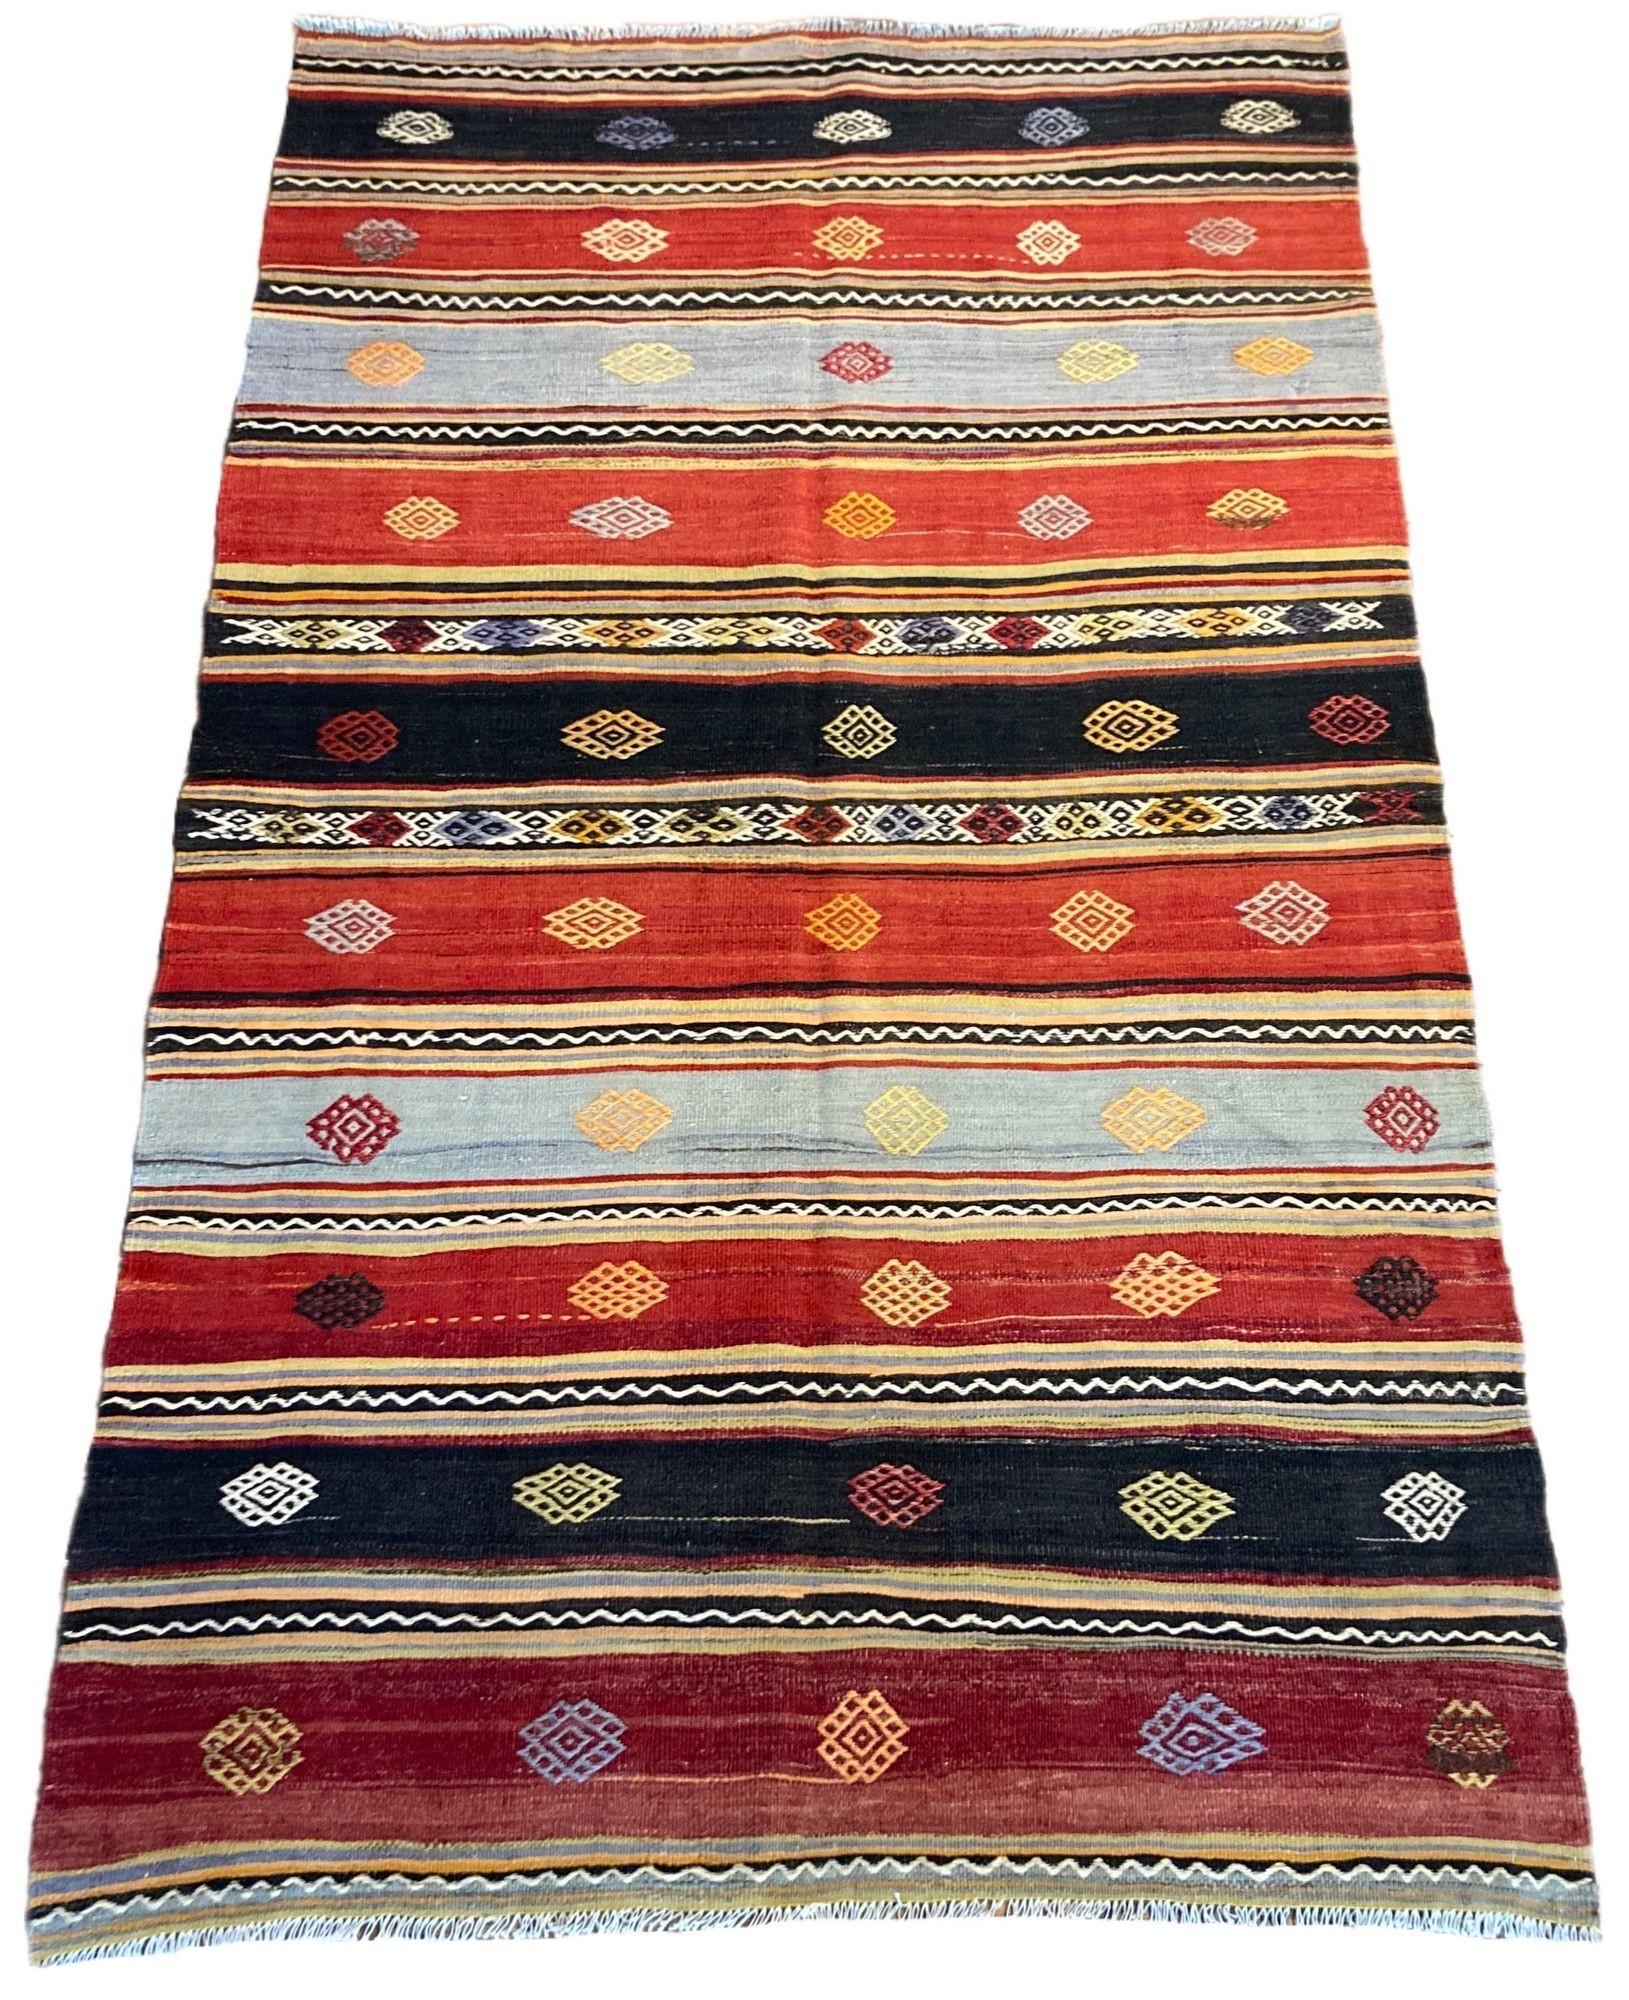 A beautiful vintage kilim, handwoven in central Turkey circa 1960 featuring a multicoloured banded design in blues, reds, dark greys and golds.
Size: 2.17m x 1.32m (7ft 2in x 4ft 4in)
This kilim is in good condition with light, age related wear.